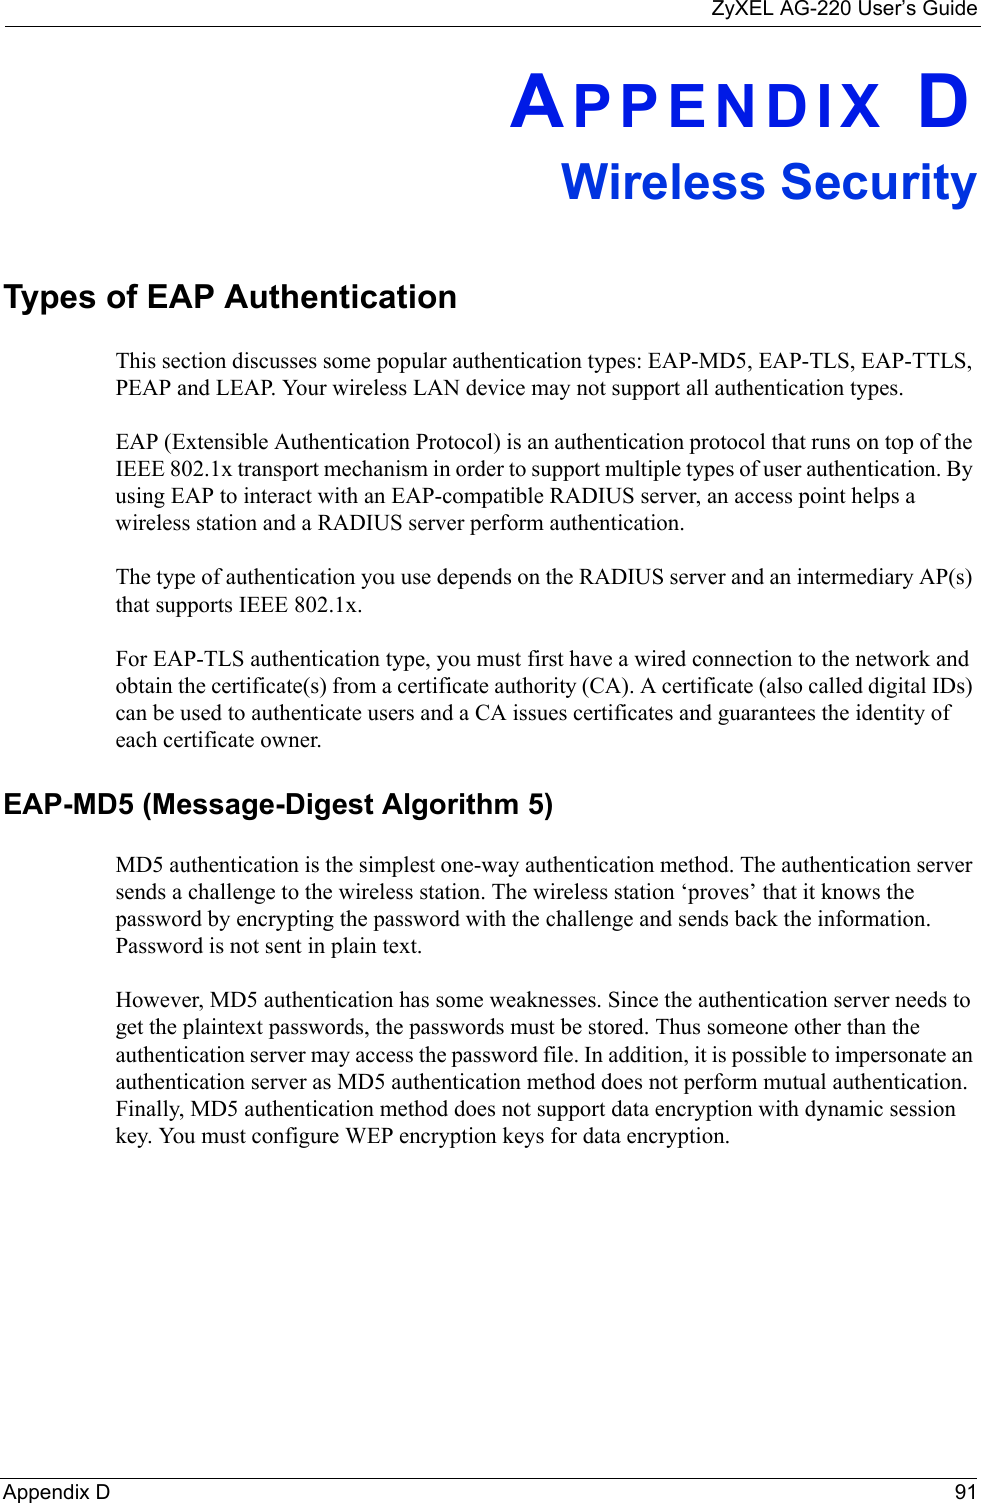 ZyXEL AG-220 User’s GuideAppendix D 91APPENDIX DWireless SecurityTypes of EAP AuthenticationThis section discusses some popular authentication types: EAP-MD5, EAP-TLS, EAP-TTLS, PEAP and LEAP. Your wireless LAN device may not support all authentication types. EAP (Extensible Authentication Protocol) is an authentication protocol that runs on top of the IEEE 802.1x transport mechanism in order to support multiple types of user authentication. By using EAP to interact with an EAP-compatible RADIUS server, an access point helps a wireless station and a RADIUS server perform authentication. The type of authentication you use depends on the RADIUS server and an intermediary AP(s) that supports IEEE 802.1x.For EAP-TLS authentication type, you must first have a wired connection to the network and obtain the certificate(s) from a certificate authority (CA). A certificate (also called digital IDs) can be used to authenticate users and a CA issues certificates and guarantees the identity of each certificate owner.EAP-MD5 (Message-Digest Algorithm 5)MD5 authentication is the simplest one-way authentication method. The authentication server sends a challenge to the wireless station. The wireless station ‘proves’ that it knows the password by encrypting the password with the challenge and sends back the information. Password is not sent in plain text. However, MD5 authentication has some weaknesses. Since the authentication server needs to get the plaintext passwords, the passwords must be stored. Thus someone other than the authentication server may access the password file. In addition, it is possible to impersonate an authentication server as MD5 authentication method does not perform mutual authentication. Finally, MD5 authentication method does not support data encryption with dynamic session key. You must configure WEP encryption keys for data encryption. 